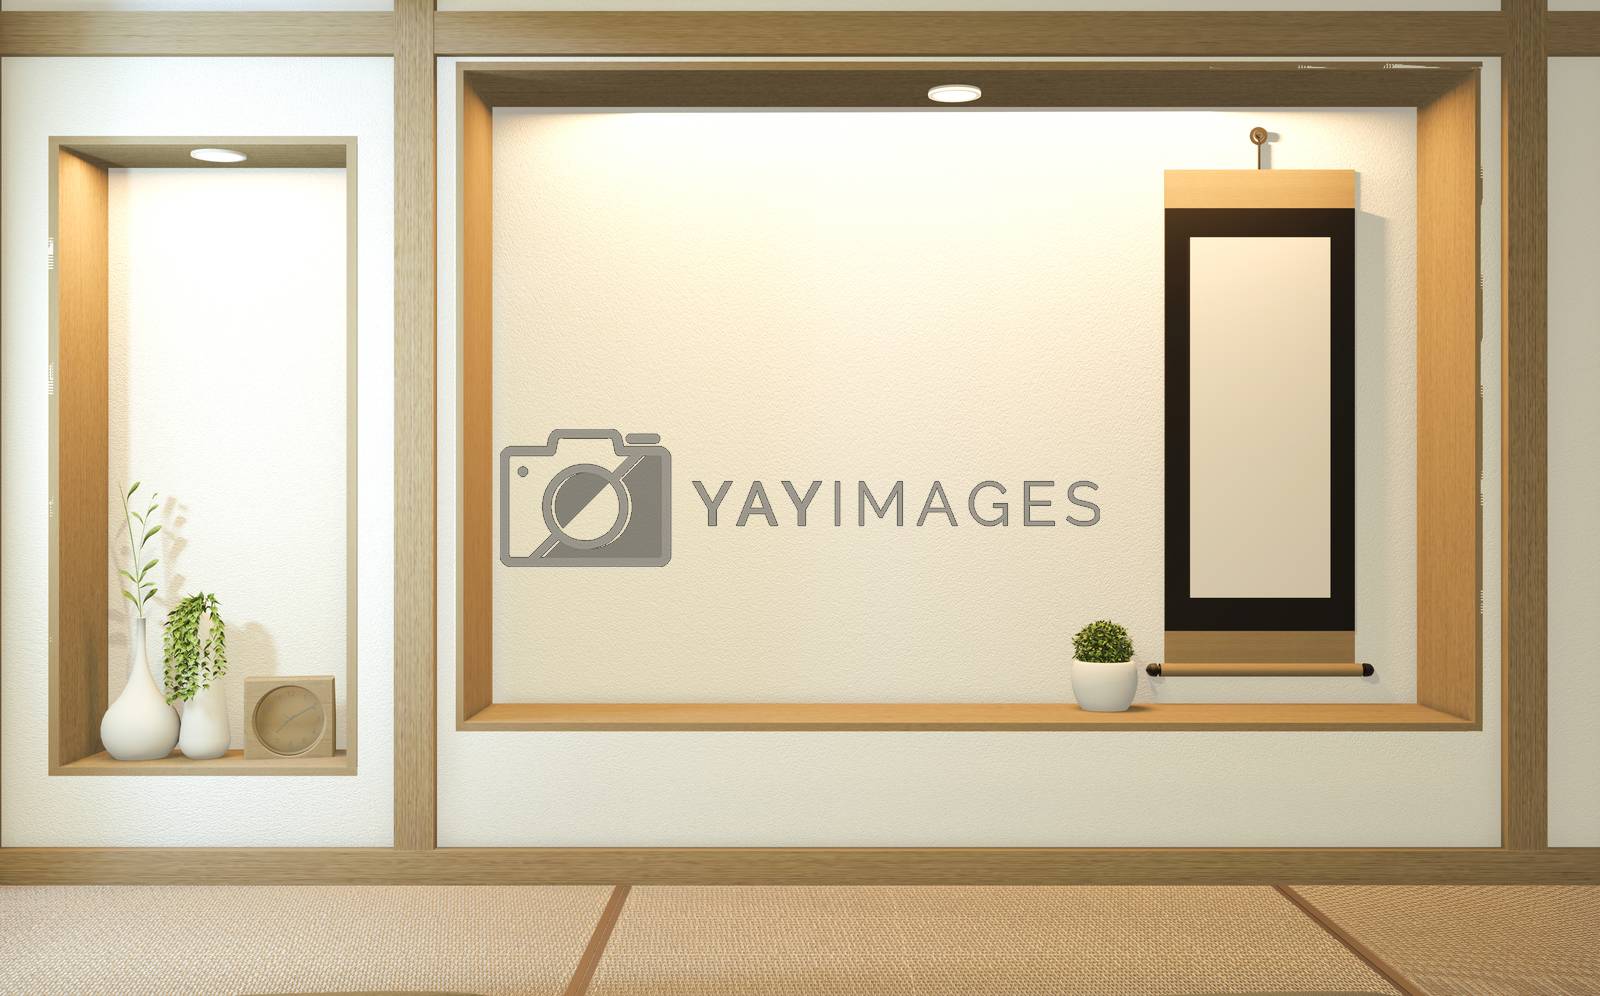 Royalty free image of Nihon room design interior with door paper and cabinet shelf wal by Minny0012011@hotmail.com